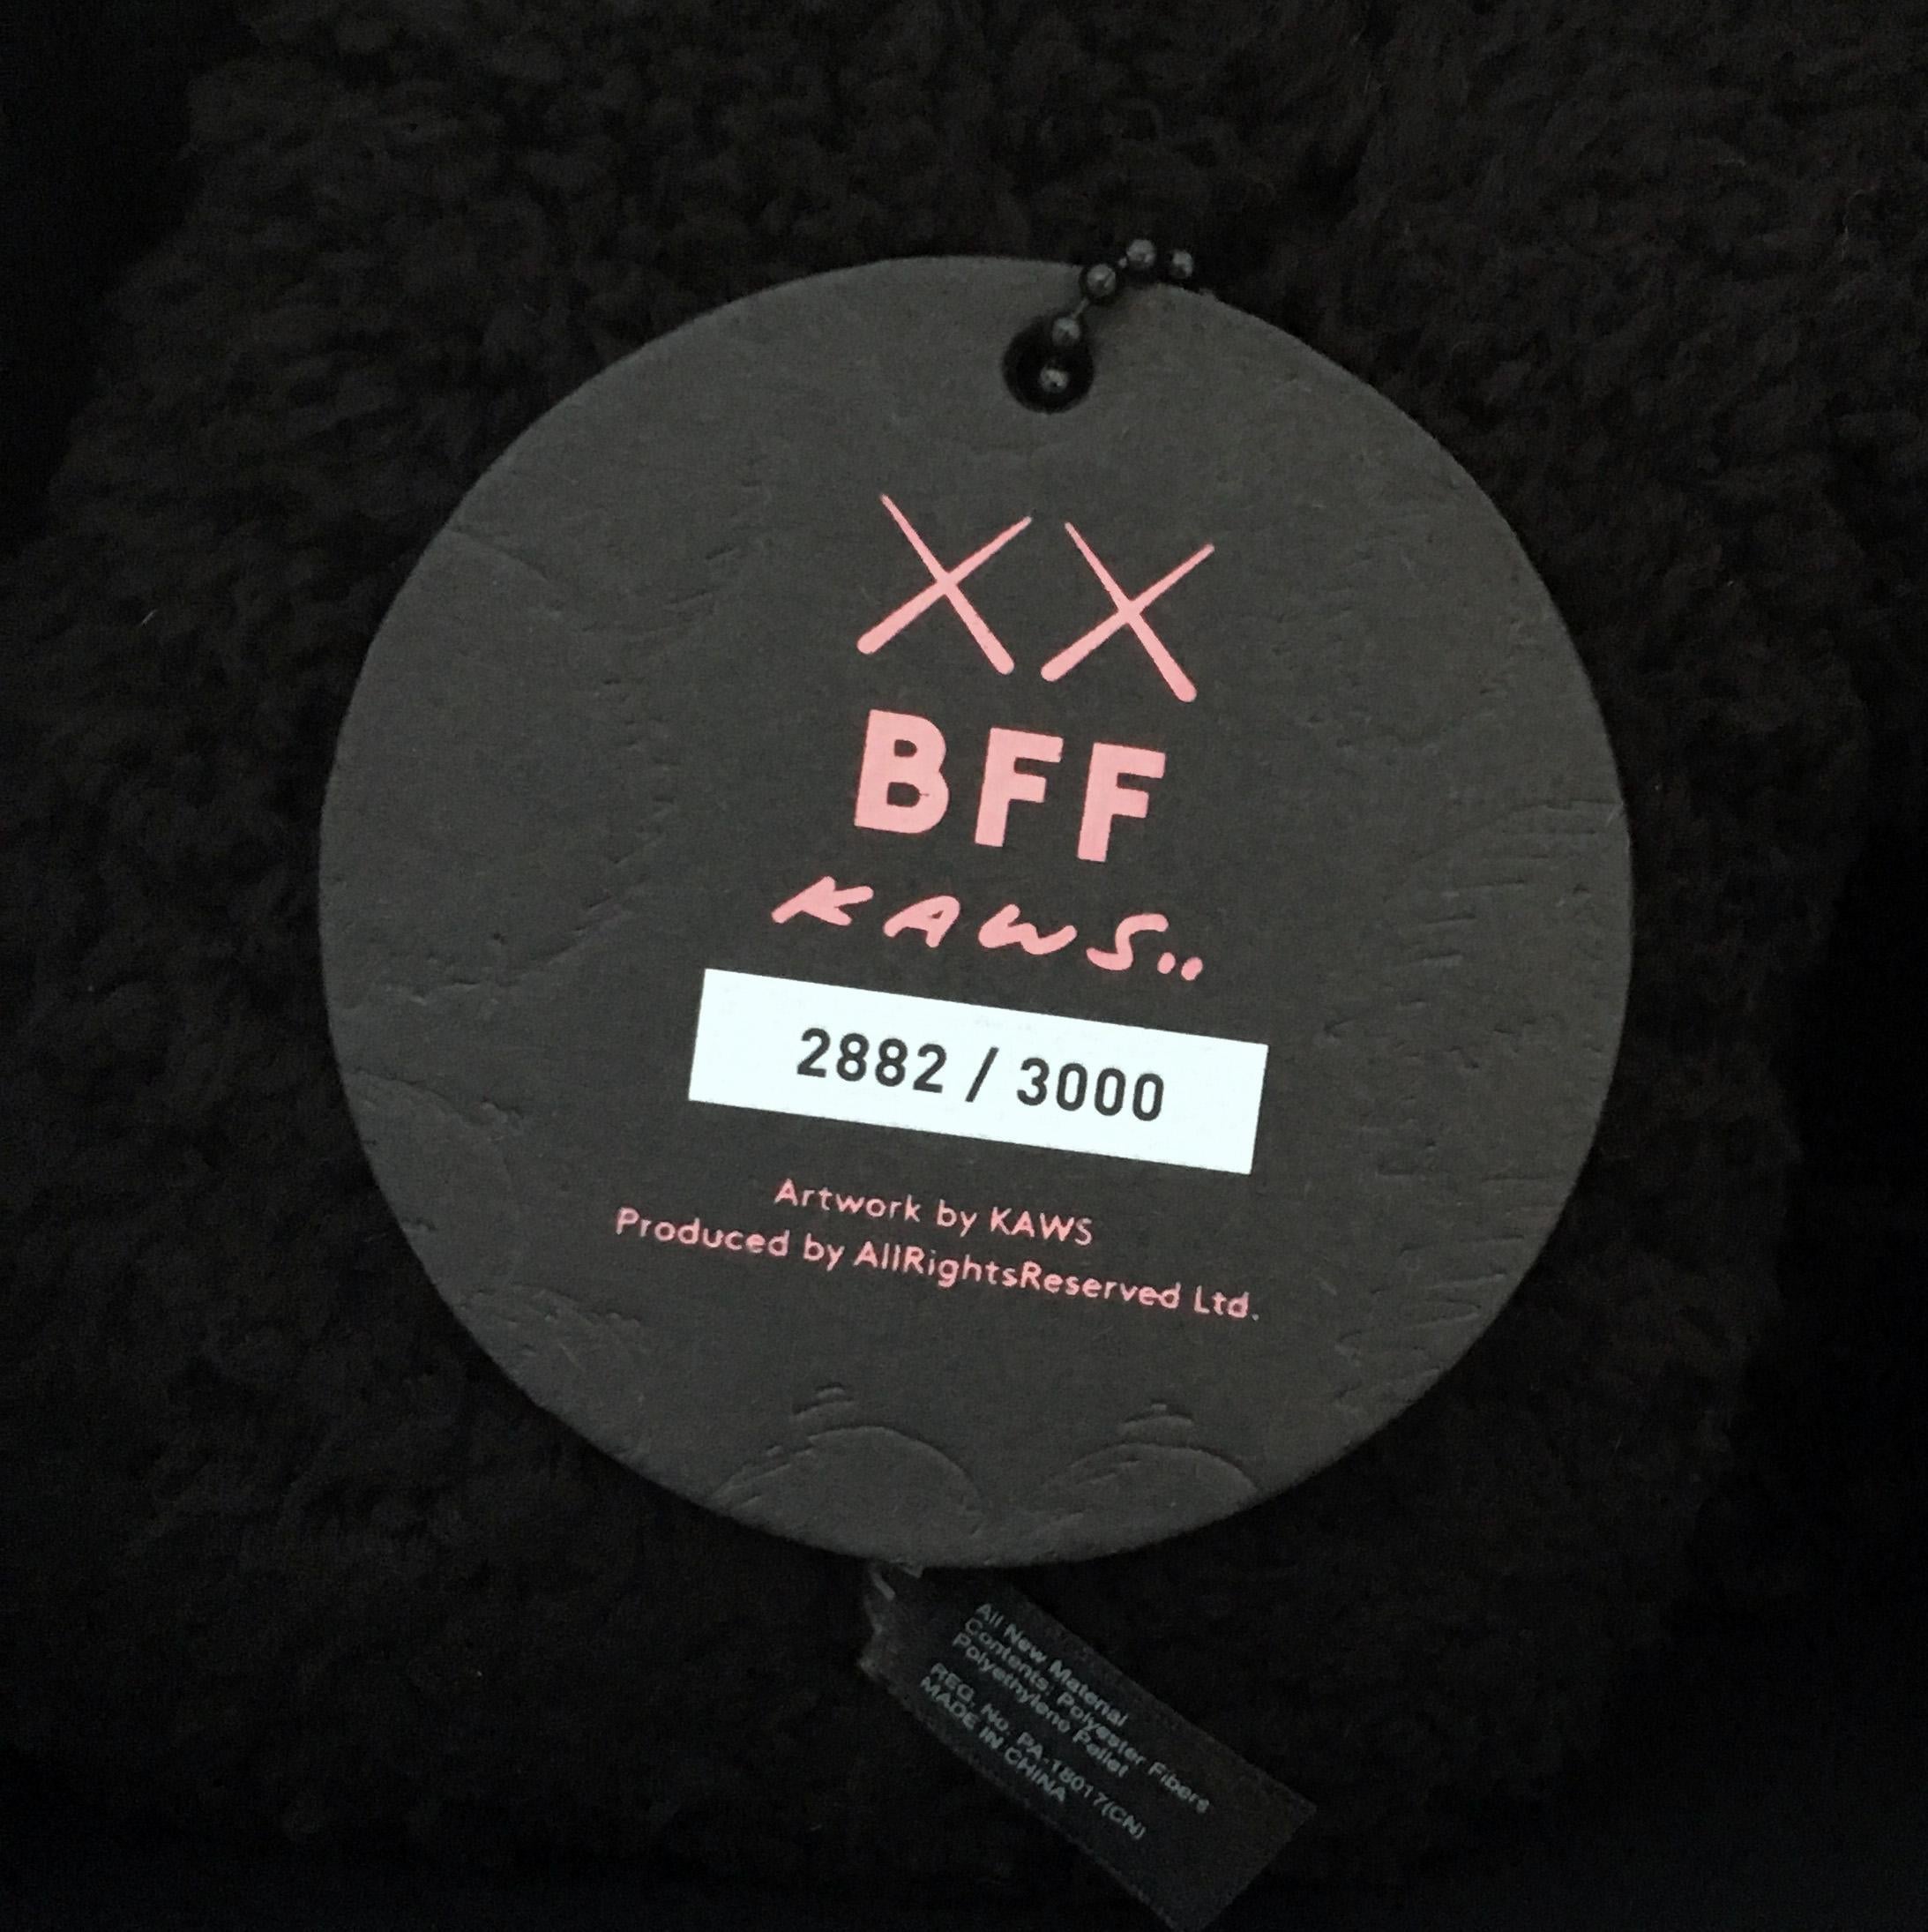 Kaws Black Plush BFF Companion
New in its original packaging. Originally created in conjunction with the exhibition, KAWS: Where The End Starts at the Modern Art Museum of Fort Worth (2016). ThIs figurine has since sold out. As only 3,000 pieces